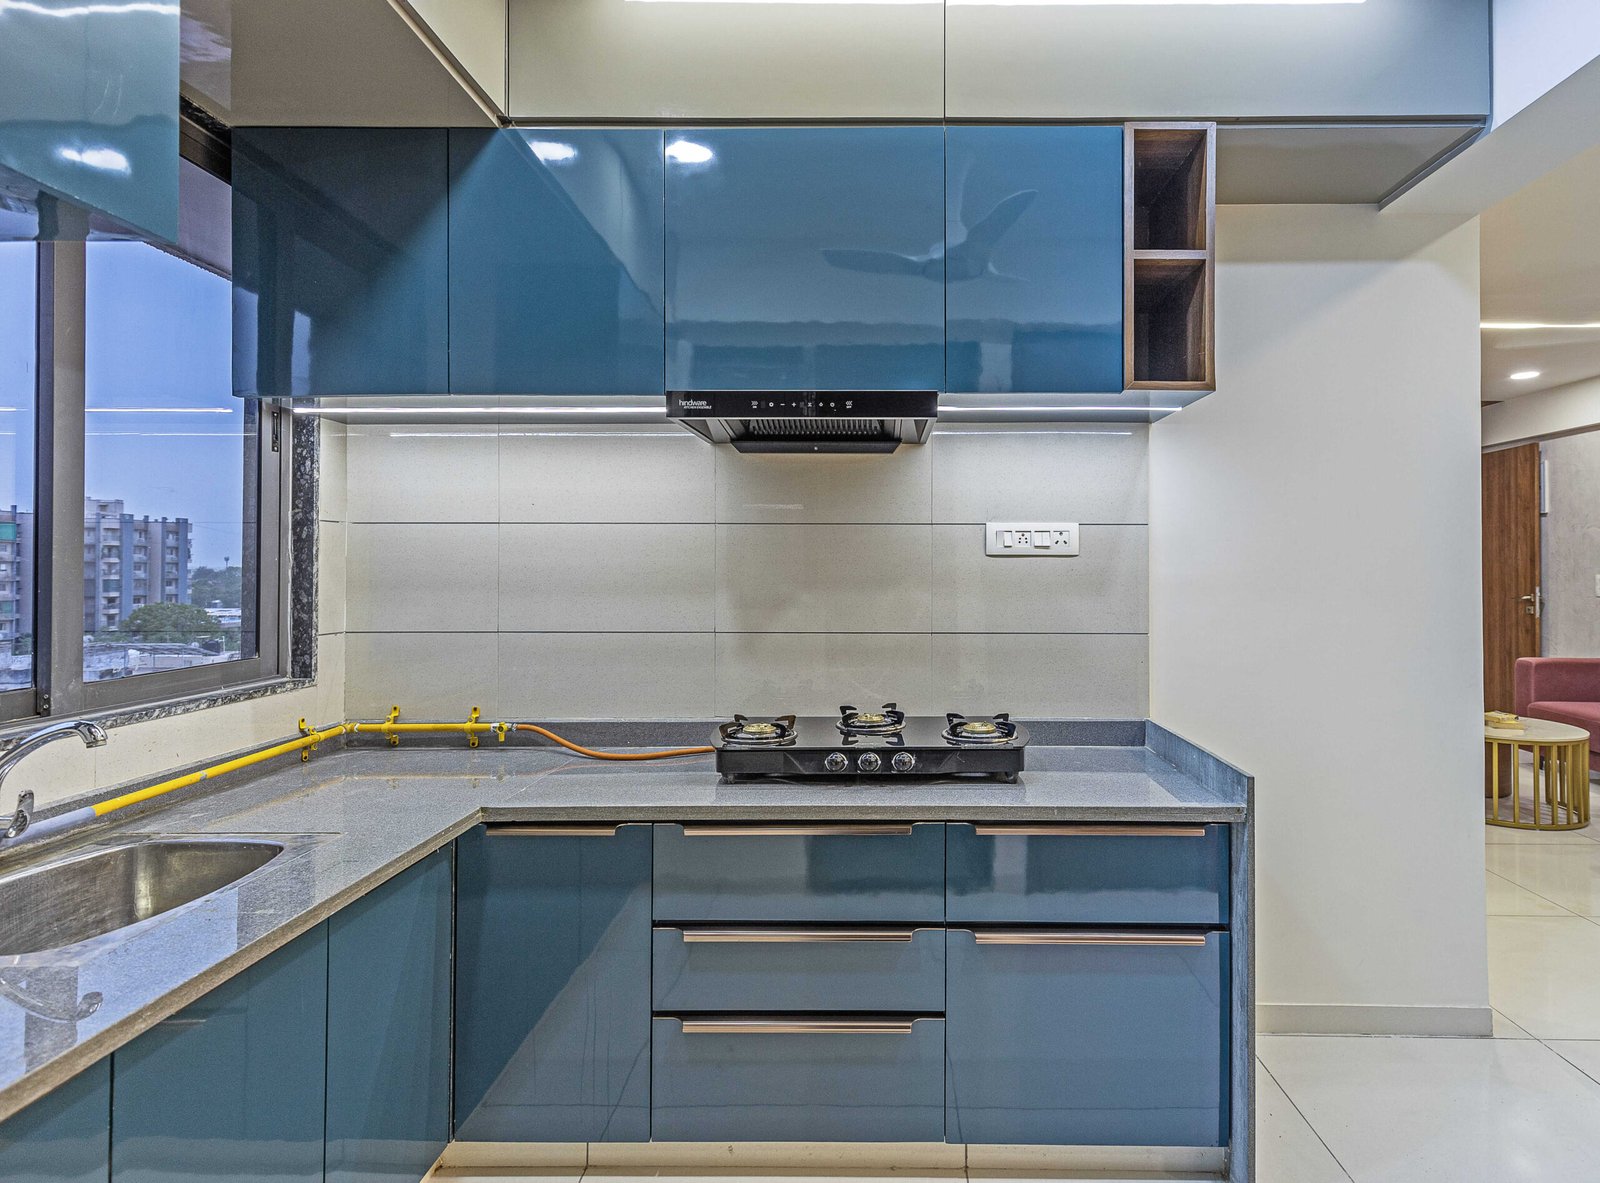 Modular Solutions to Design Your Dream Kitchen